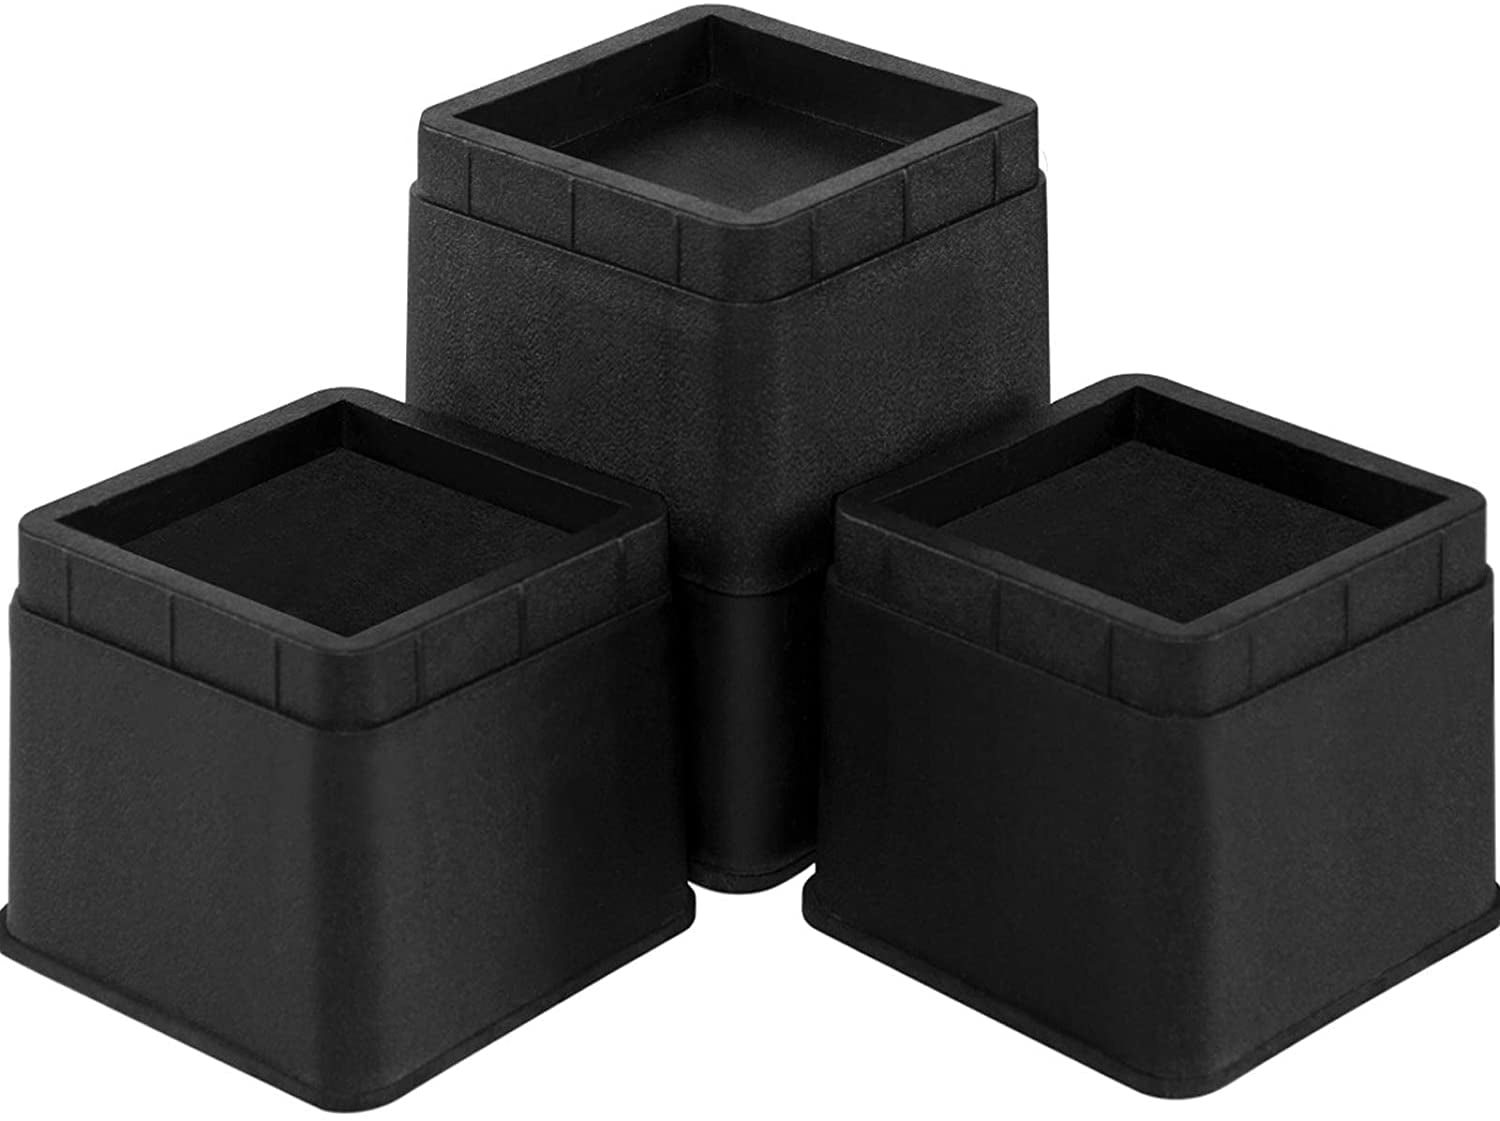 Joyclub 2 Inch Heavy Duty Bed Risers Durable and Stackable Bed Lifts Fits to ... 